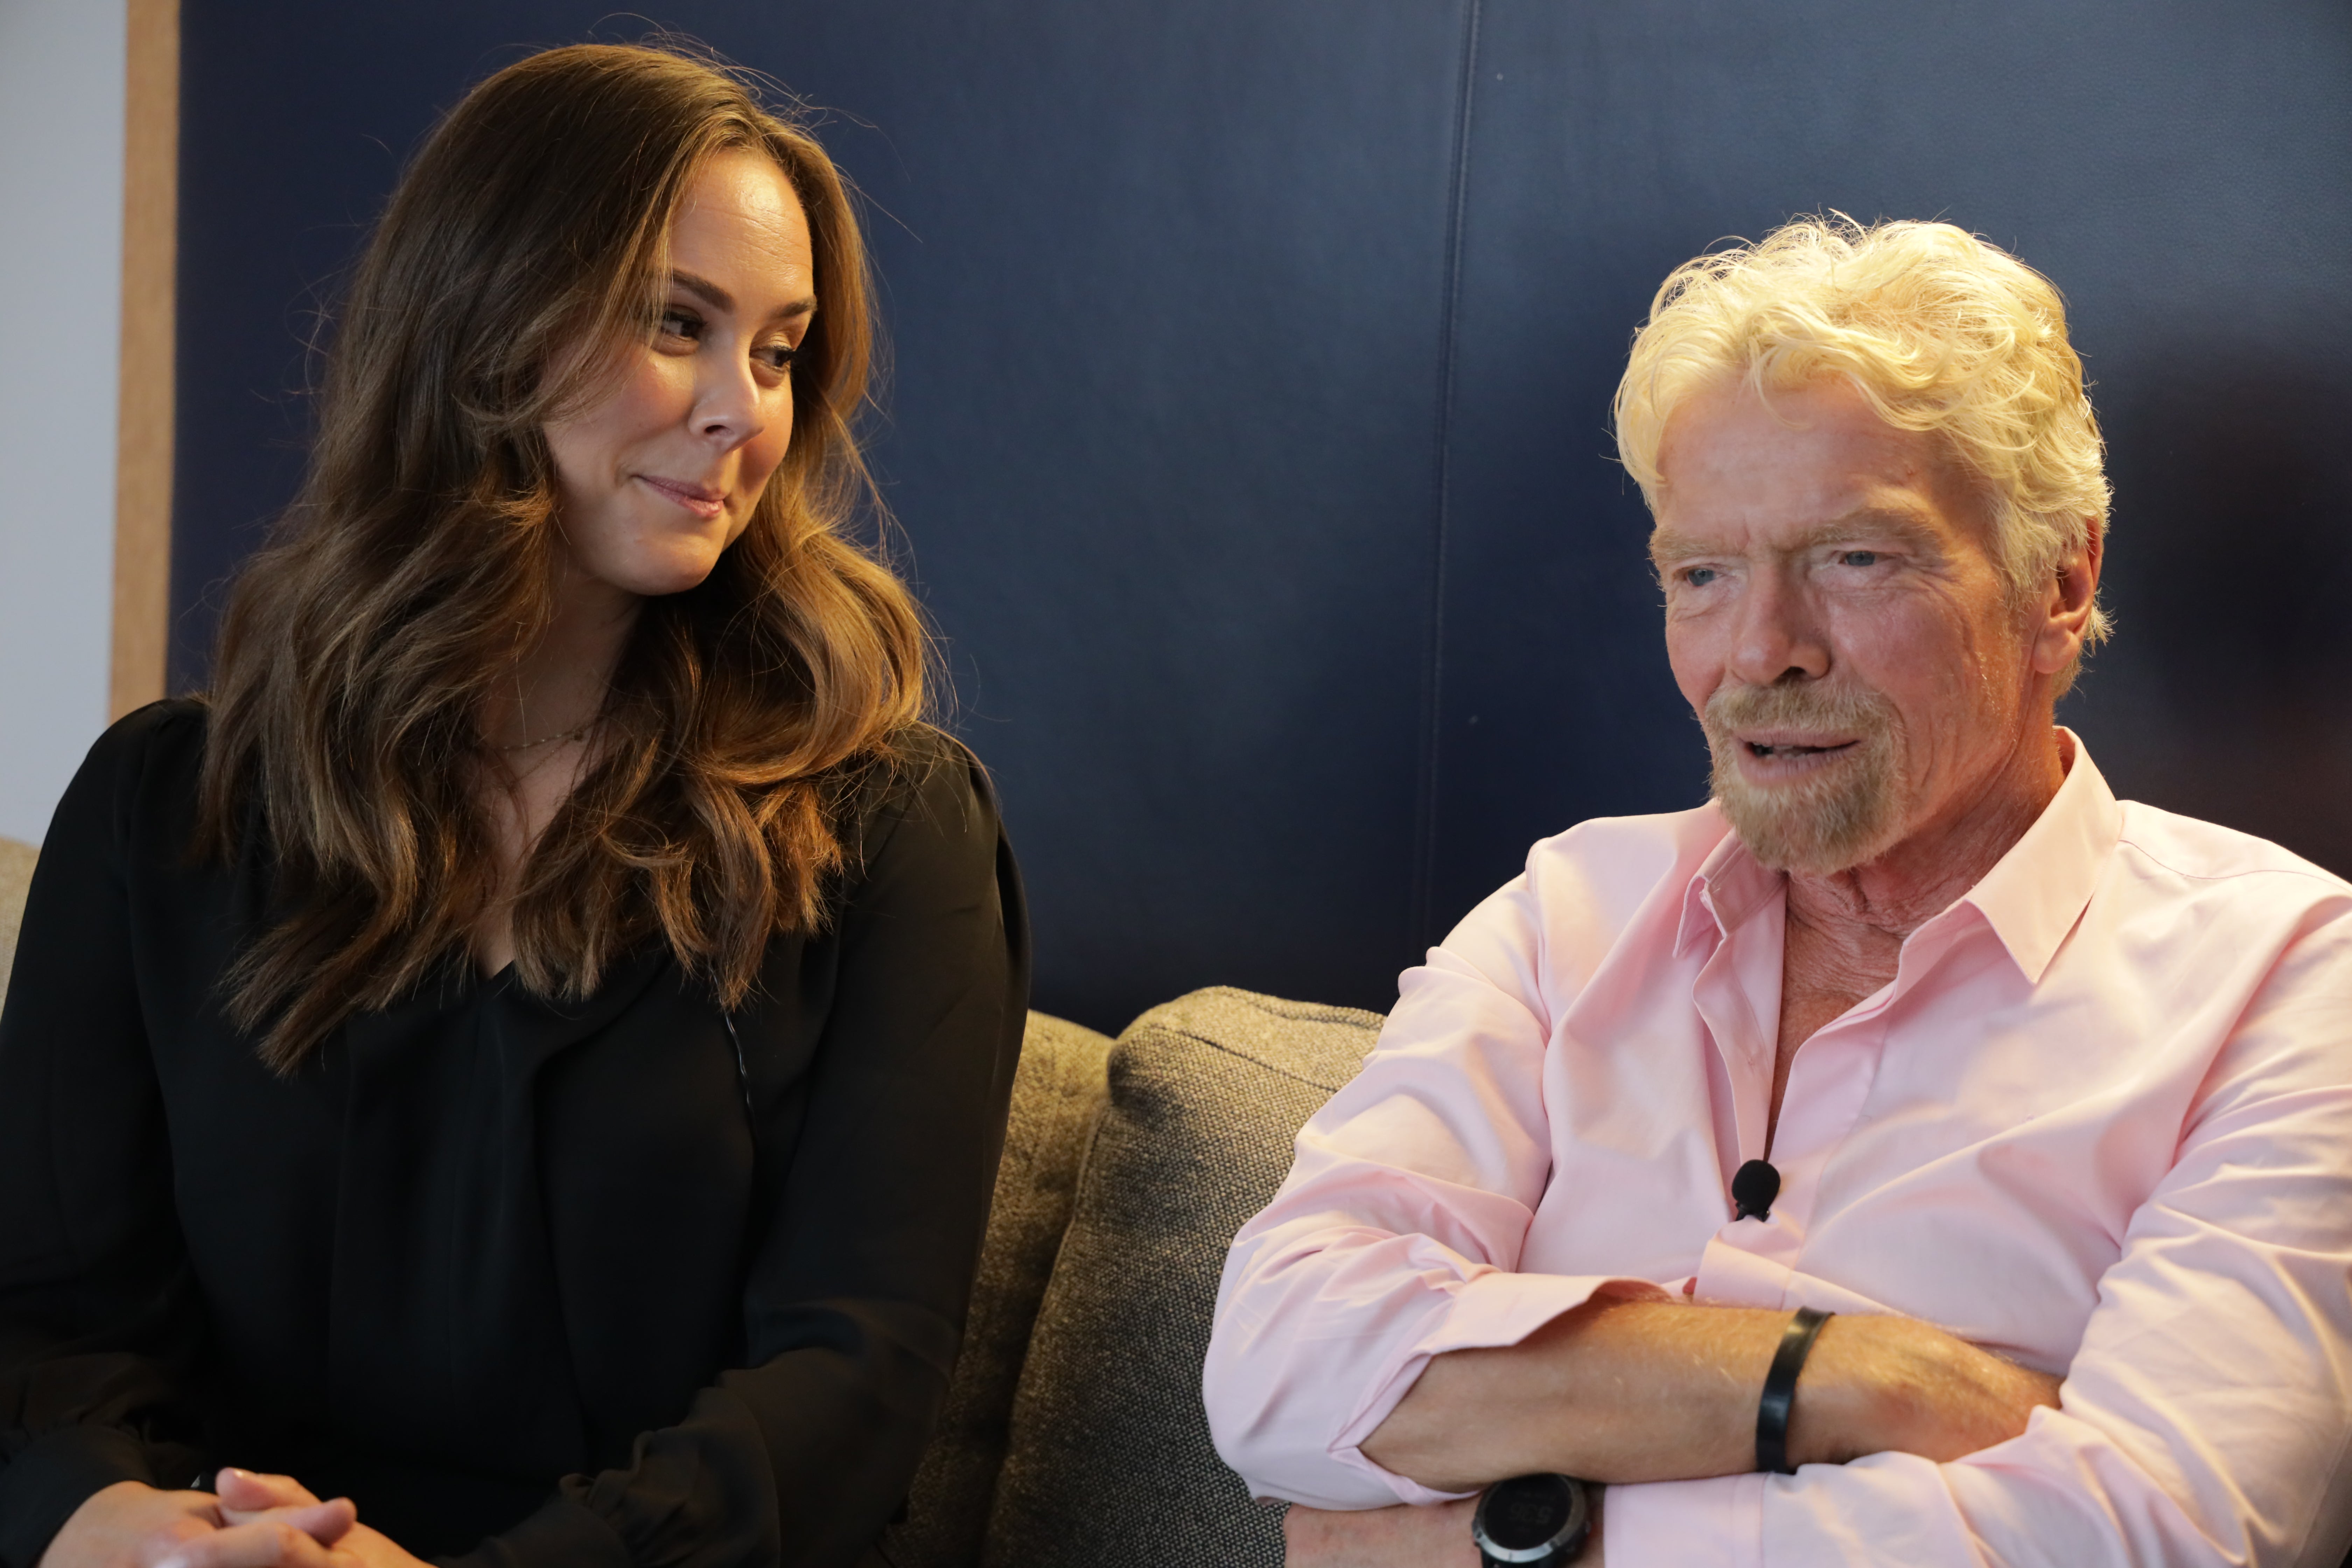 RBIJ CEO Celia Ouellette and Virgin Group founder Sir Richard Branson discuss abolishing the death penalty, New York City, 6 October 2021